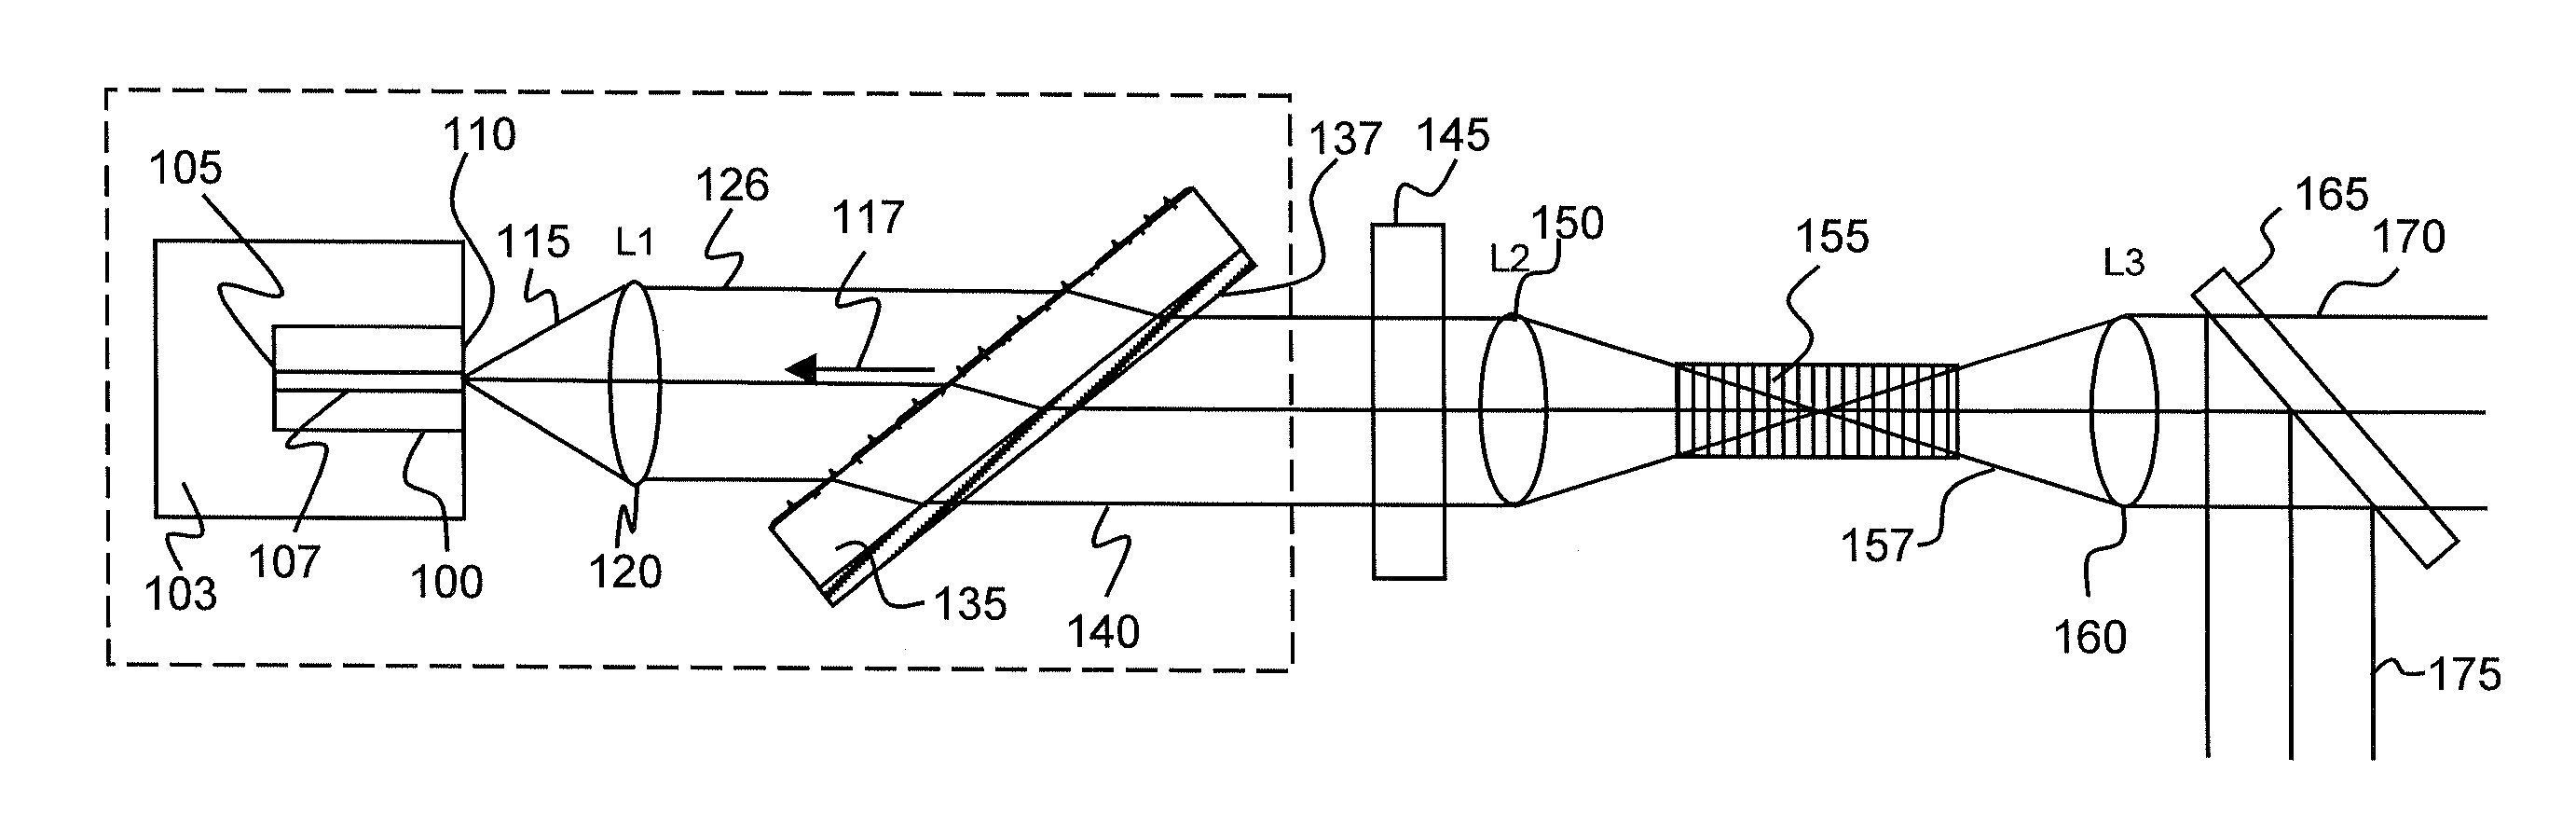 Extended cavity laser device with bulk transmission grating